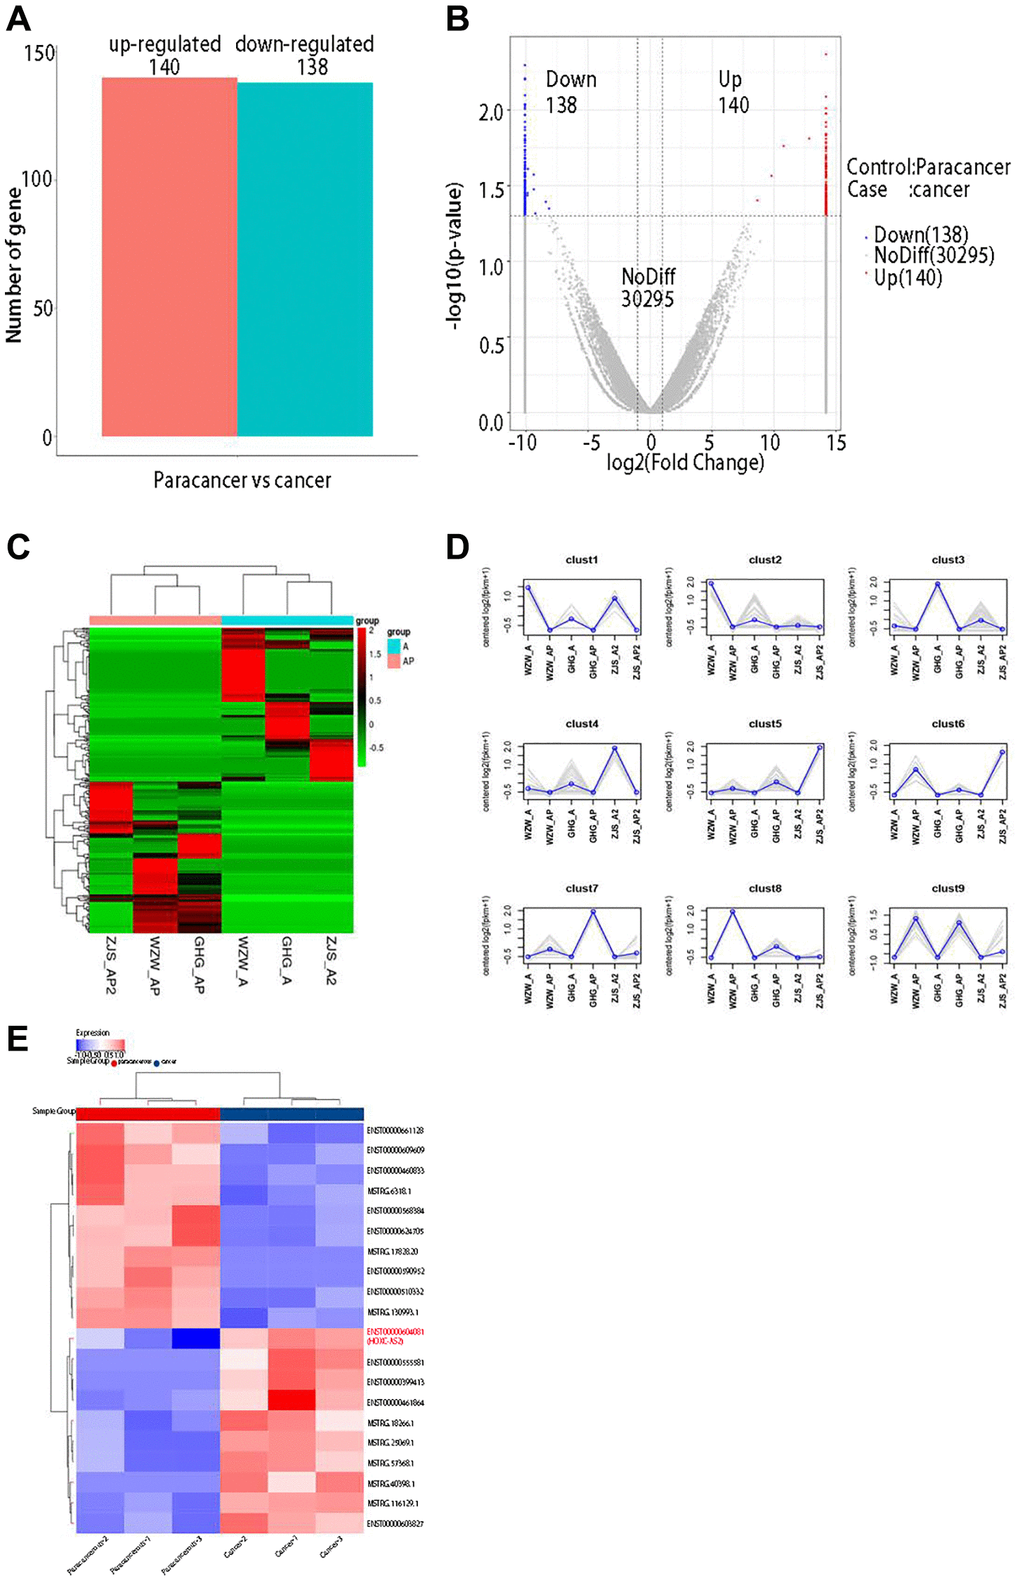 lncRNA sequencing revealed abnormally high expression of HOXC-AS2 in hypopharyngeal cancer tissues. (A) Statistical results of differentially expressed lncRNAs between different groups. Upregulated genes: lncRNAs upregulated in cases compared with controls; Downregulated genes: lncRNAs downregulated in cases compared with controls; Total DEGs: all differentially expressed lncRNAs in cases compared to controls. (B) Volcano plot of differentially expressed lncRNAs determined by sequencing in this study: The abscissa shows the log2-fold fold change values, and the ordinate shows the −log10 (p) values. The two vertical dashed lines in the figure indicate the differential expression thresholds (2-fold). The dotted line indicates the P-value threshold of 0.05. The red dots indicate upregulated lncRNAs in this group, the blue dots indicate downregulated lncRNAs in this group, and the gray dots indicate nonsignificant differentially expressed lncRNAs. (C) Clustering of differentially expressed lncRNAs: lncRNAs are shown in rows, each sample is shown in a column, red indicates high expression of a lncRNA, and green indicates low expression of a lncRNA. (D) Trend analysis after clustering in this study: the gray line shows the expression pattern of genes in each cluster, and the blue line shows the average expression level of all genes in the cluster in the sample. (E) Differential expression of lncRNAs was visualized on a heatmap after bioinformatics analysis of lncRNA sequencing data.